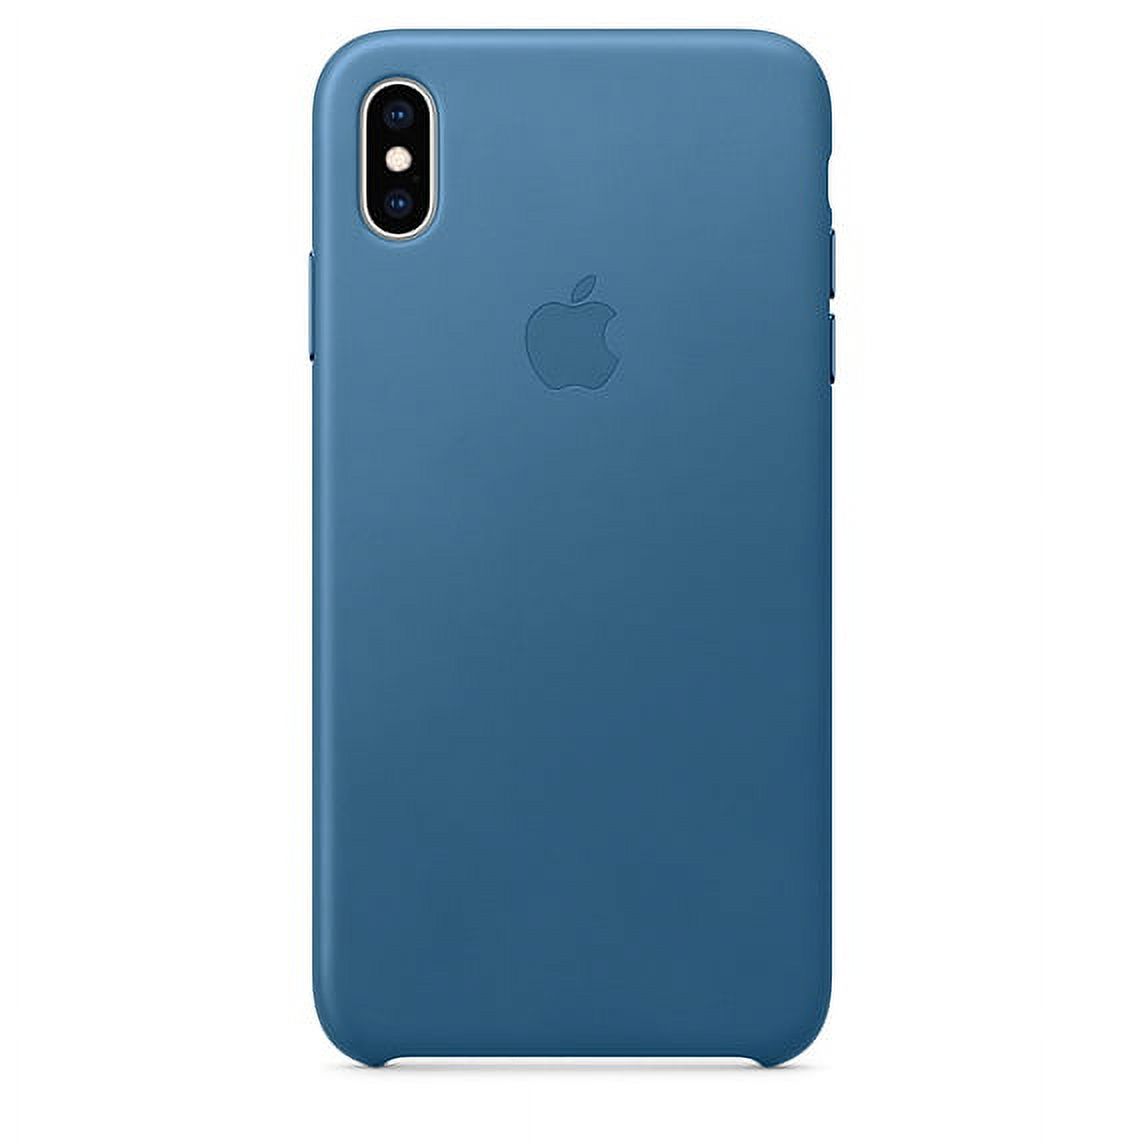 Apple Leather Case for iPhone XS Max - Cape Cod Blue - image 1 of 3